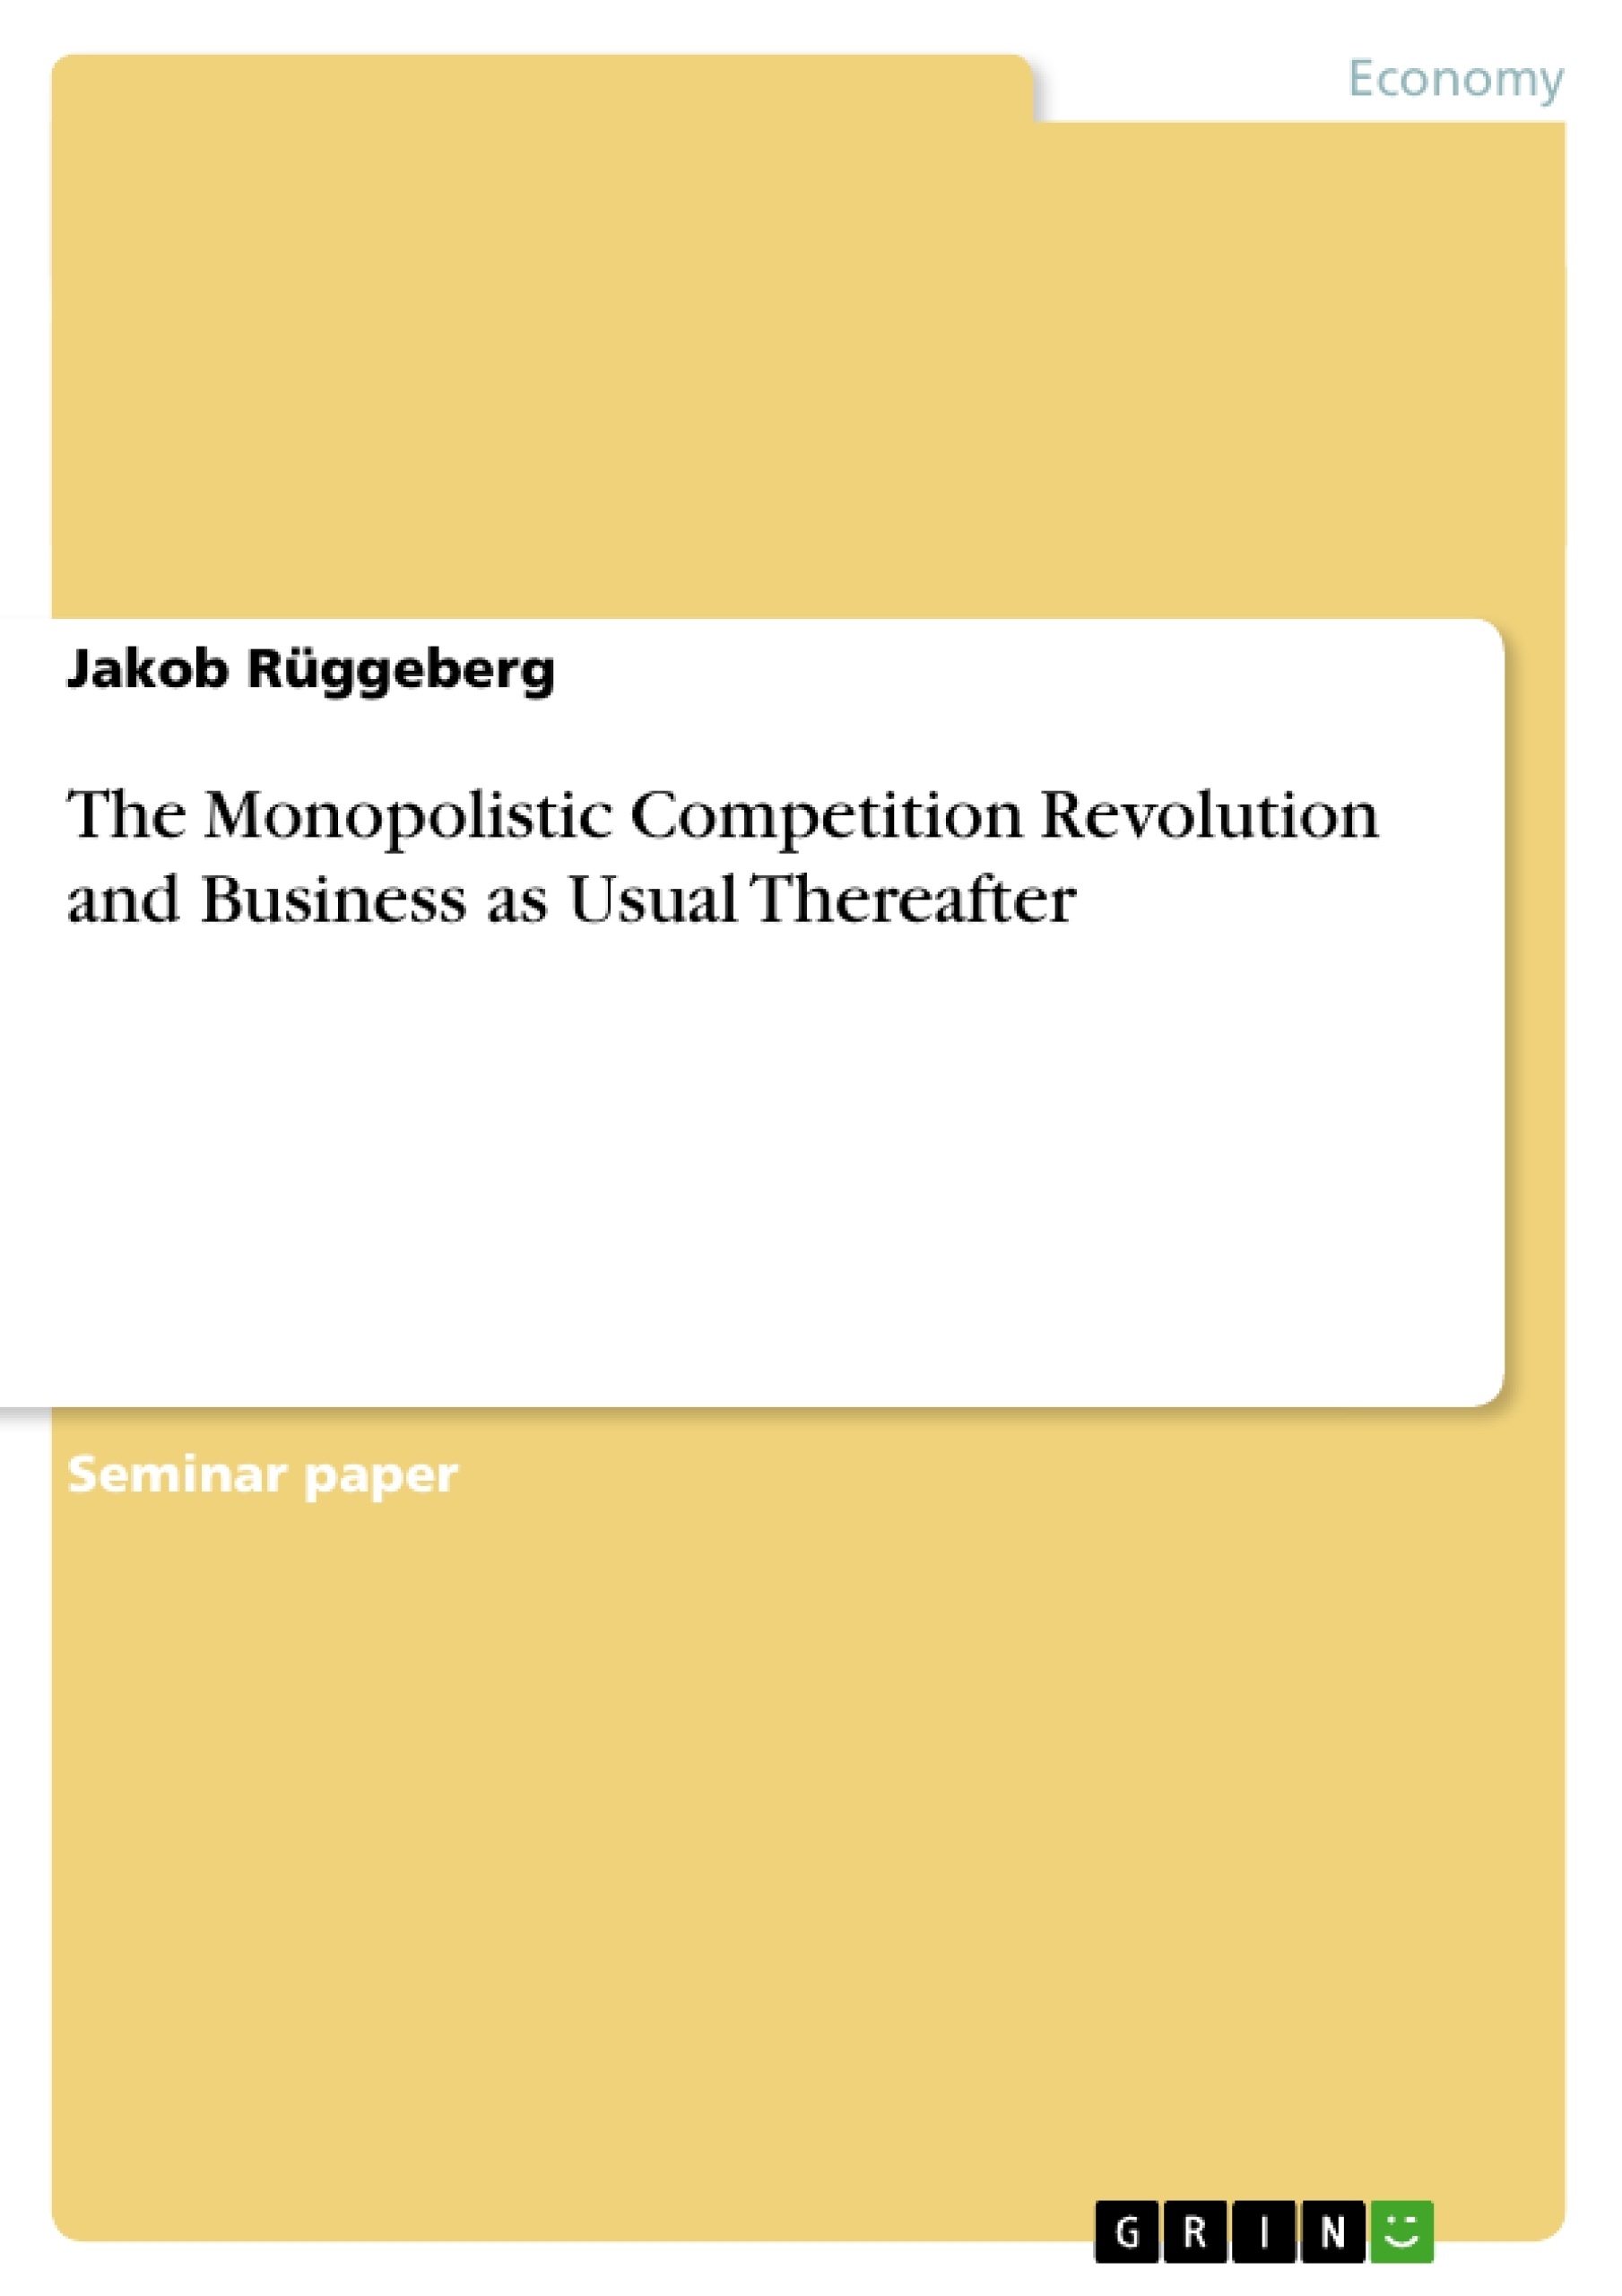 Titel: The Monopolistic Competition Revolution and Business as Usual Thereafter